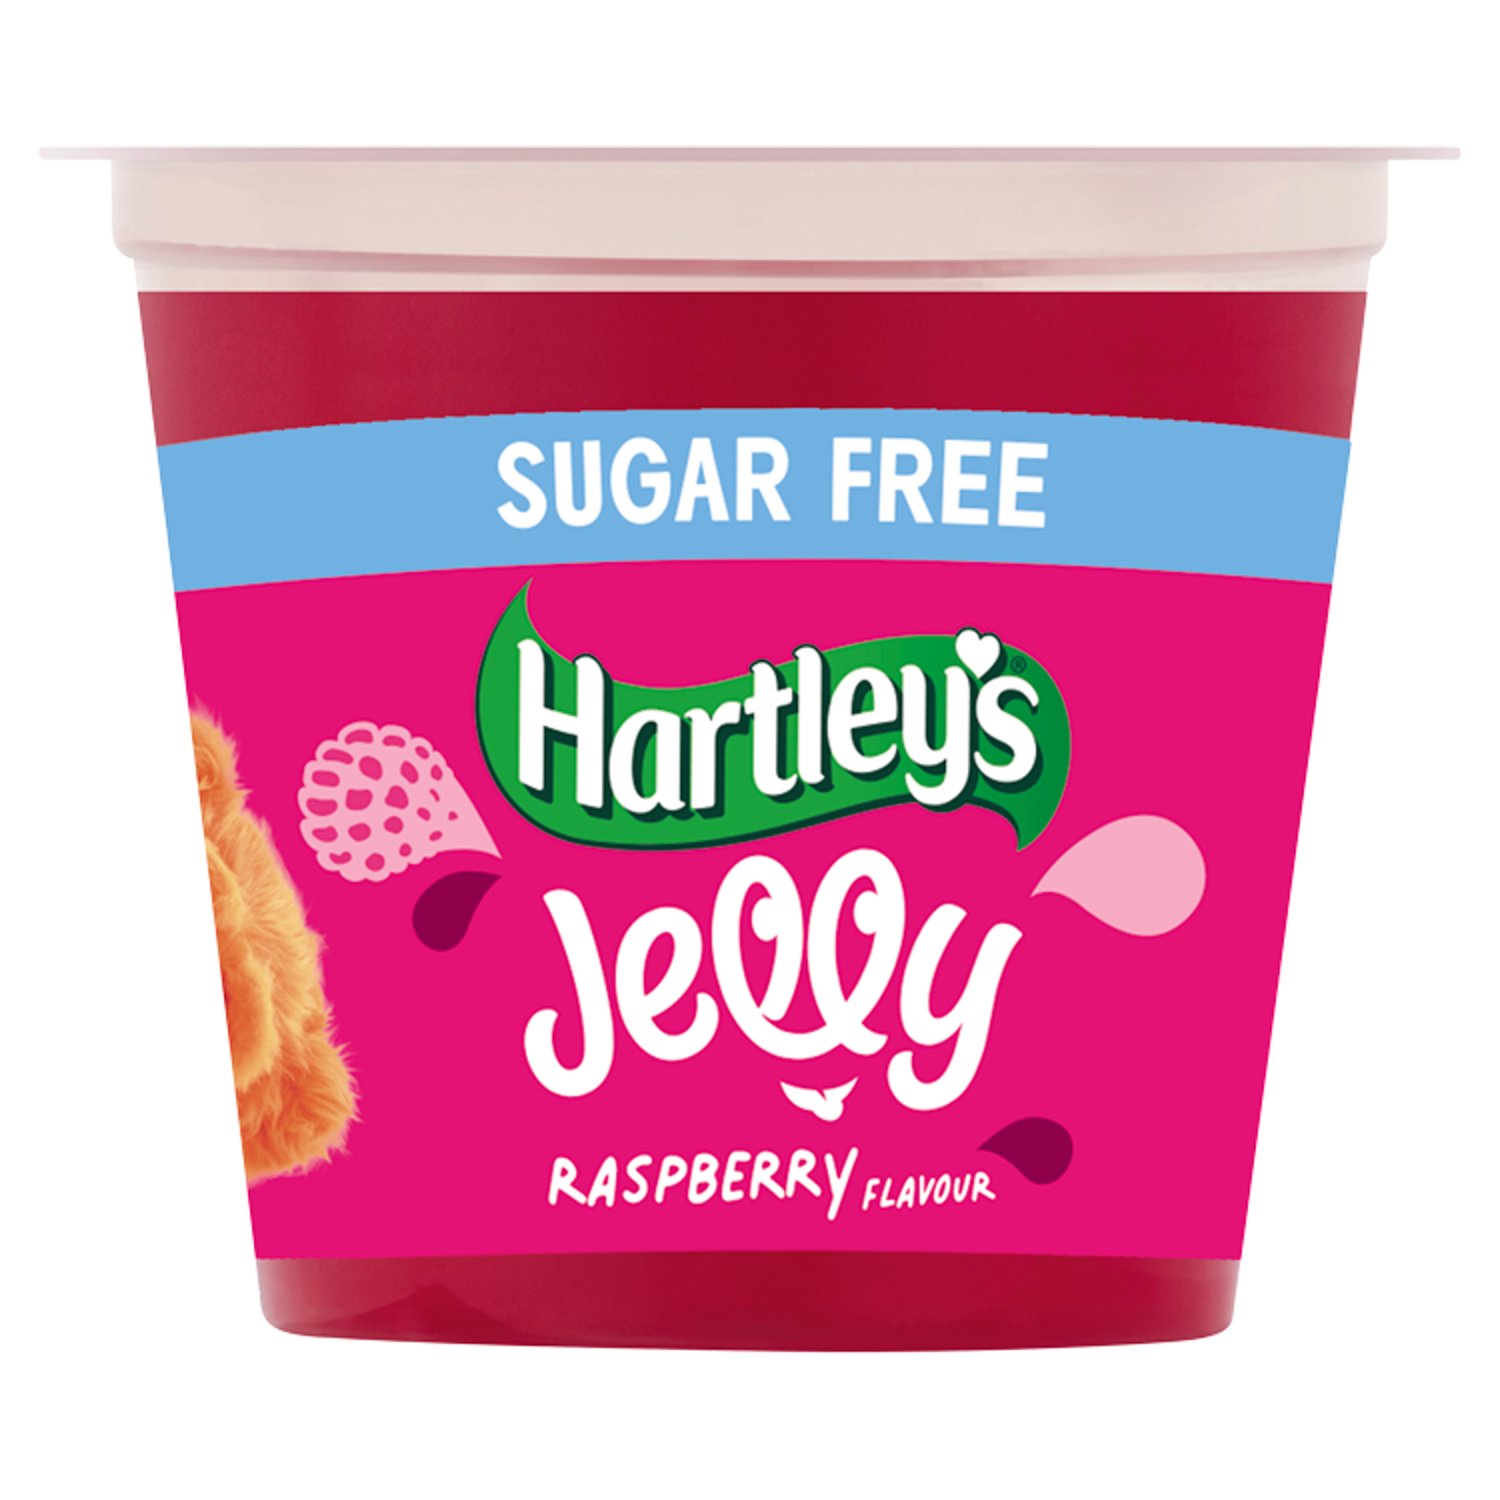 Hartley's No Added Sugar Jelly Raspberry Flavour (115 g)